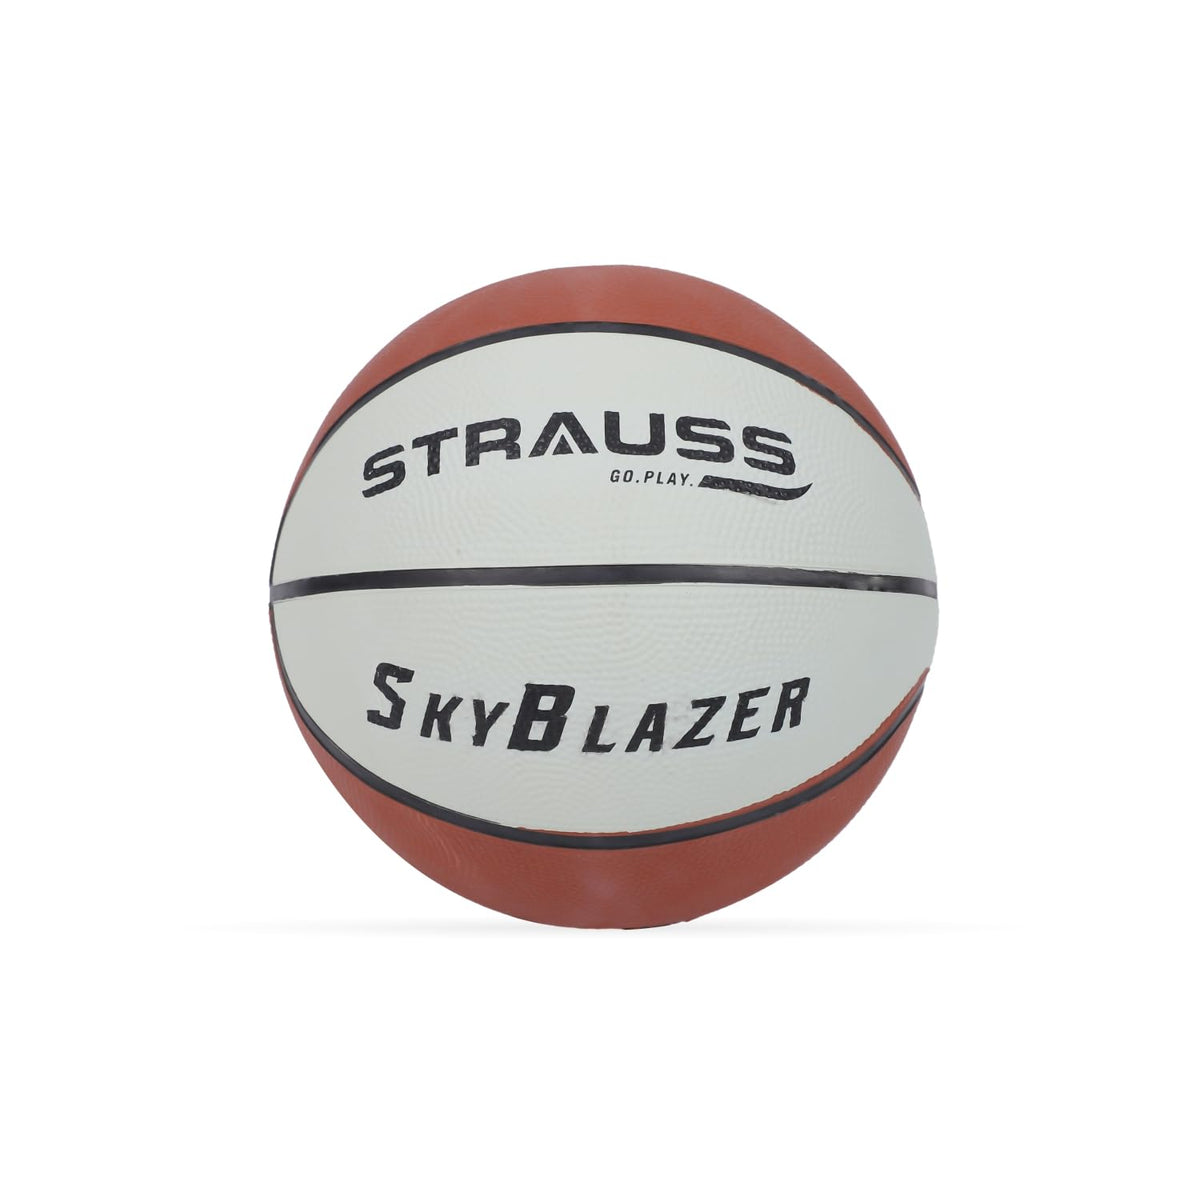 STRAUSS SkyBlazer Basketball Size 7 | Professional Basket Ball for Indoor-Outdoor Training and Match | Suitable for Hard Surface, Wooden Flooring & Synthetic Surface | for Kids and Adults